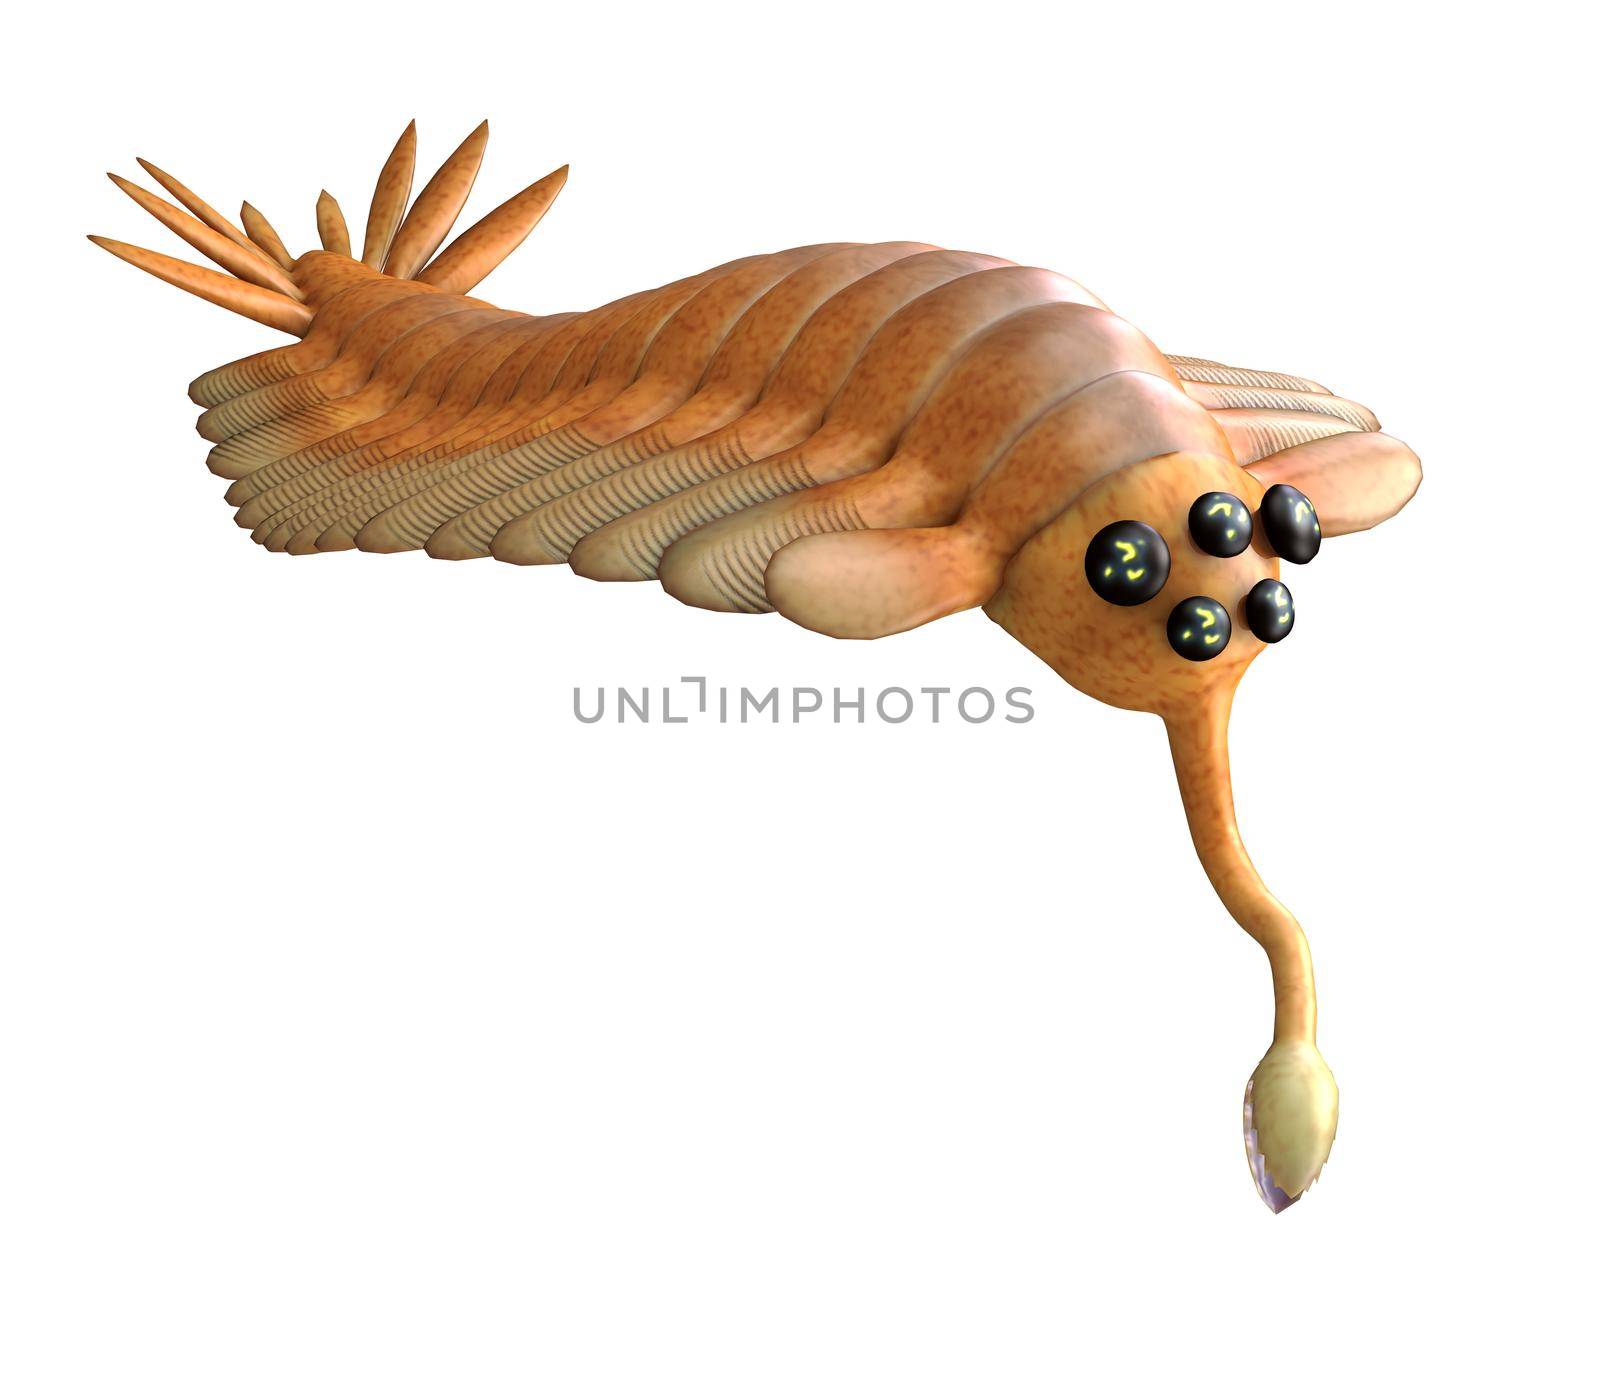 Opabinia was an arthropod predatory animal that lived in the seas of the Cambrian Age of British Columbia.